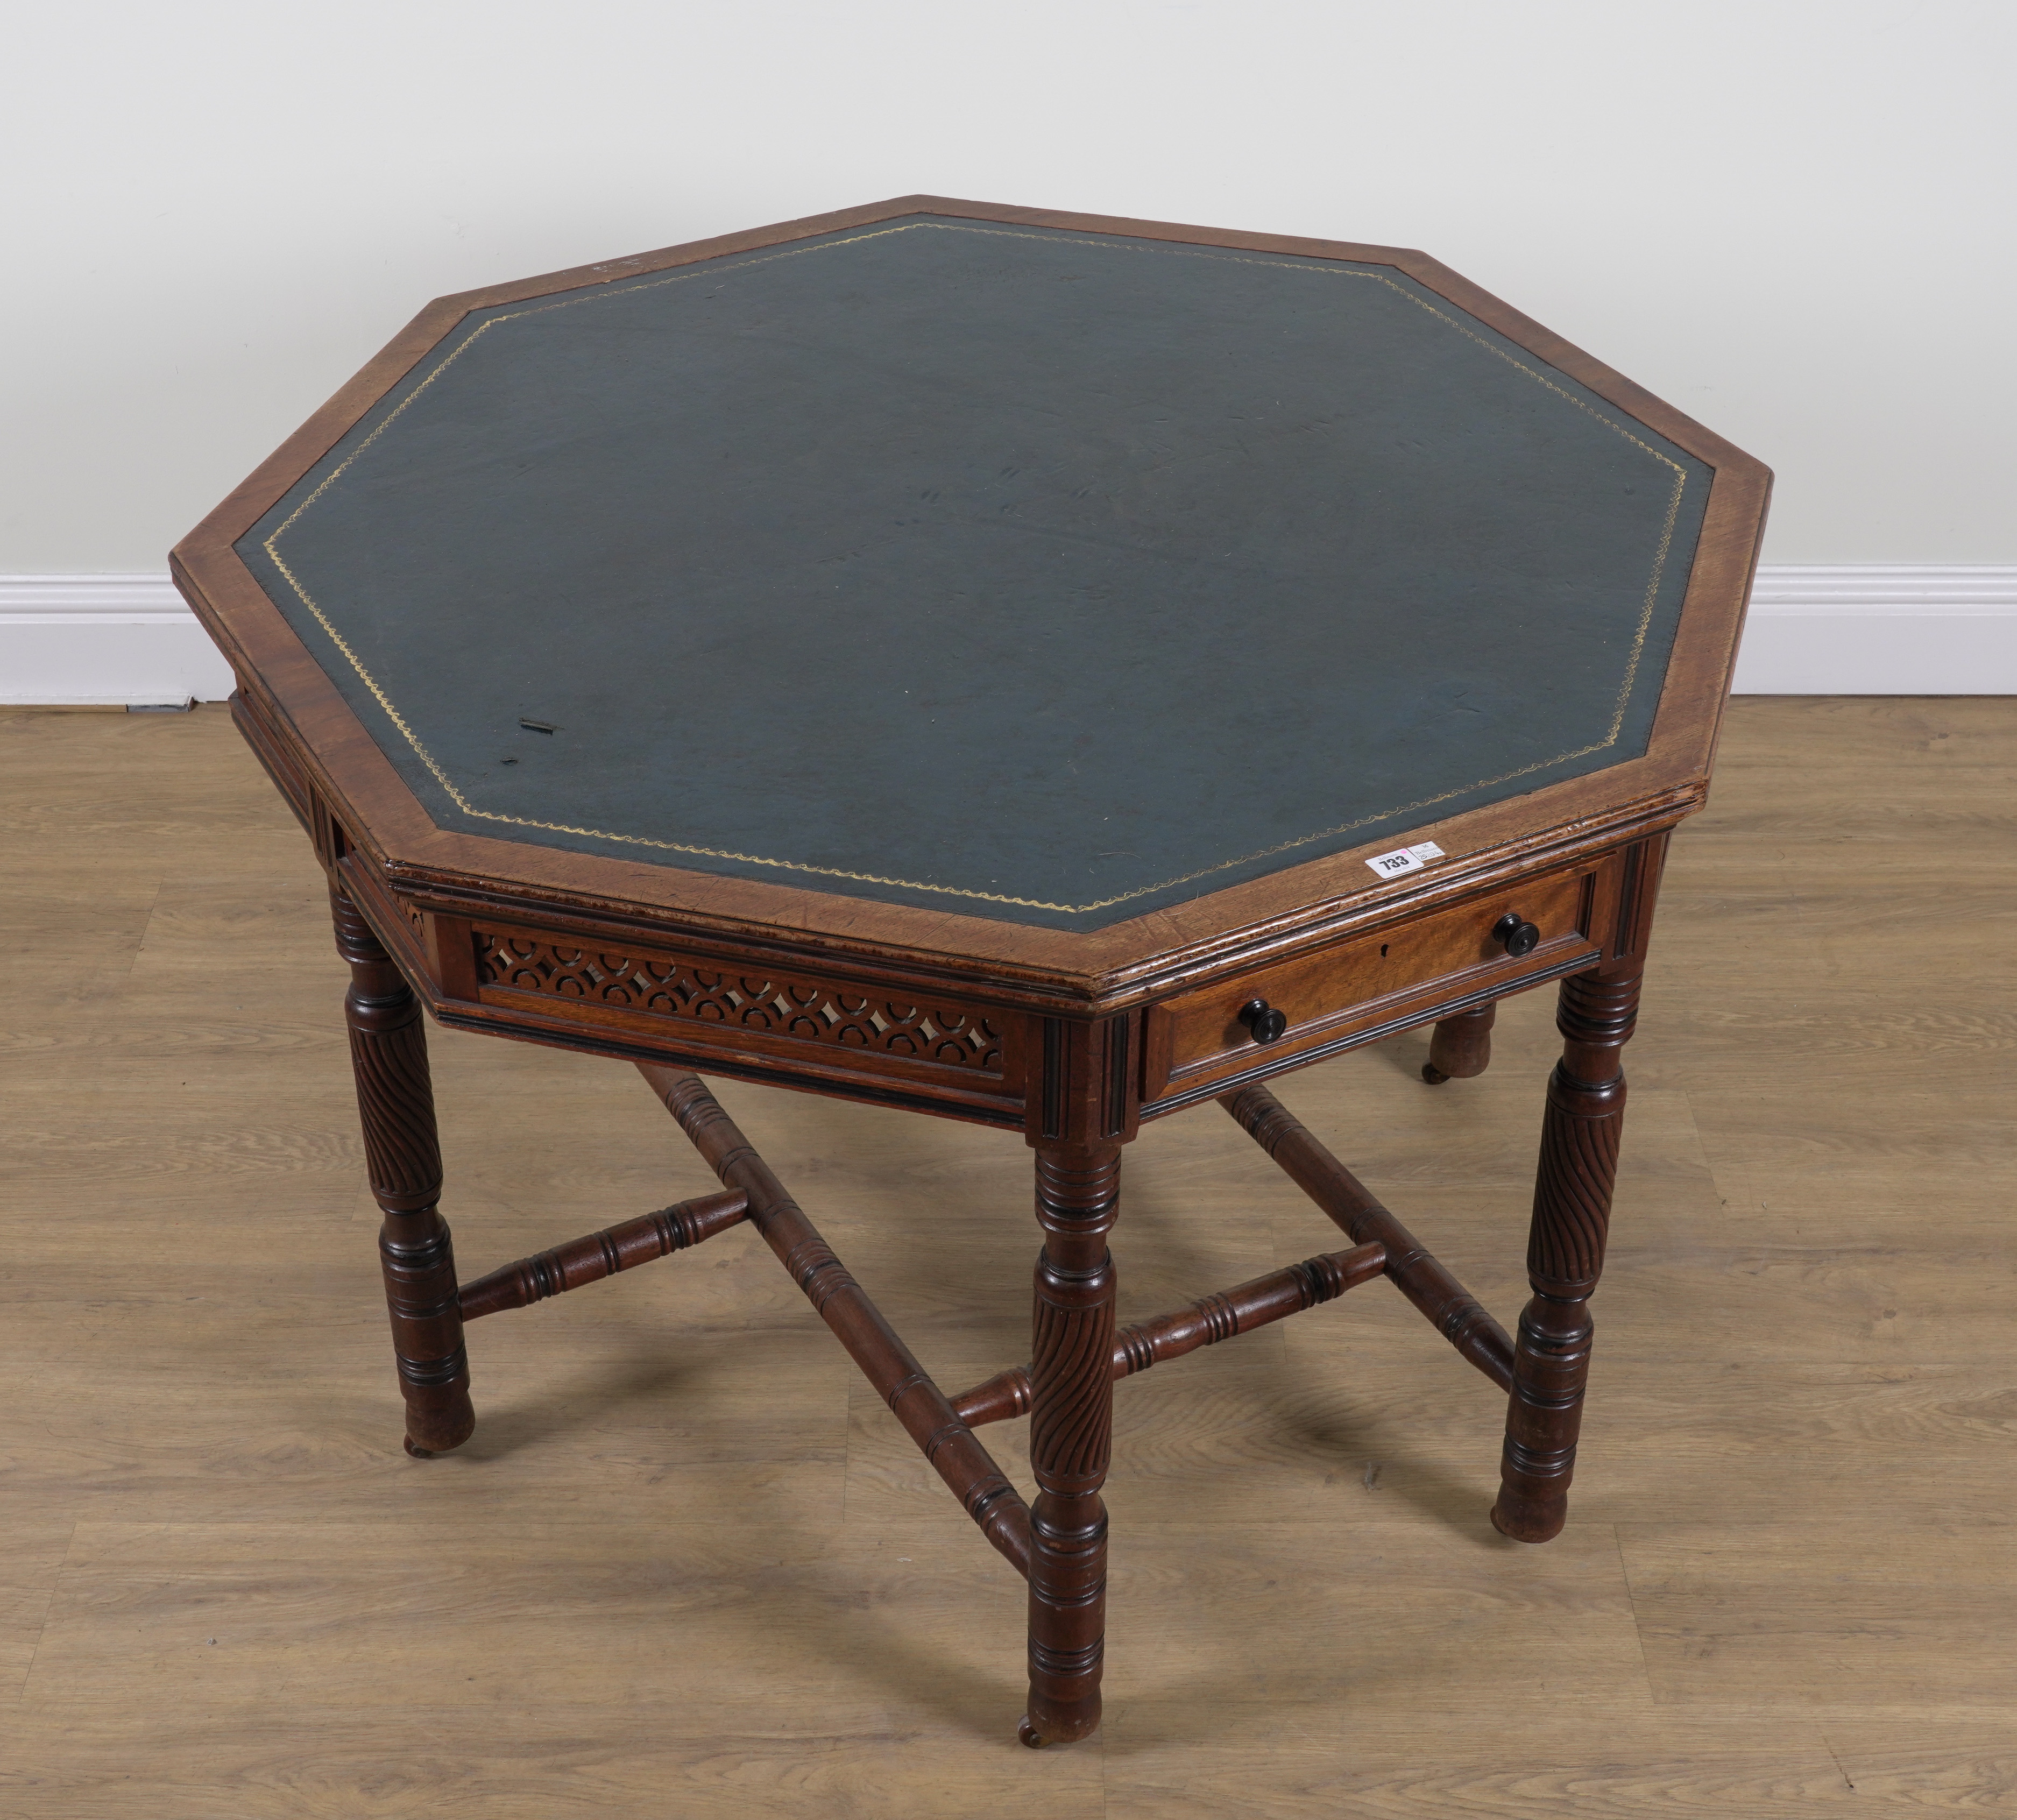 A LATE 19TH CENTURY MAHOGANY OCTAGONAL TWO DRAWER CENTRE TABLE - Image 7 of 9